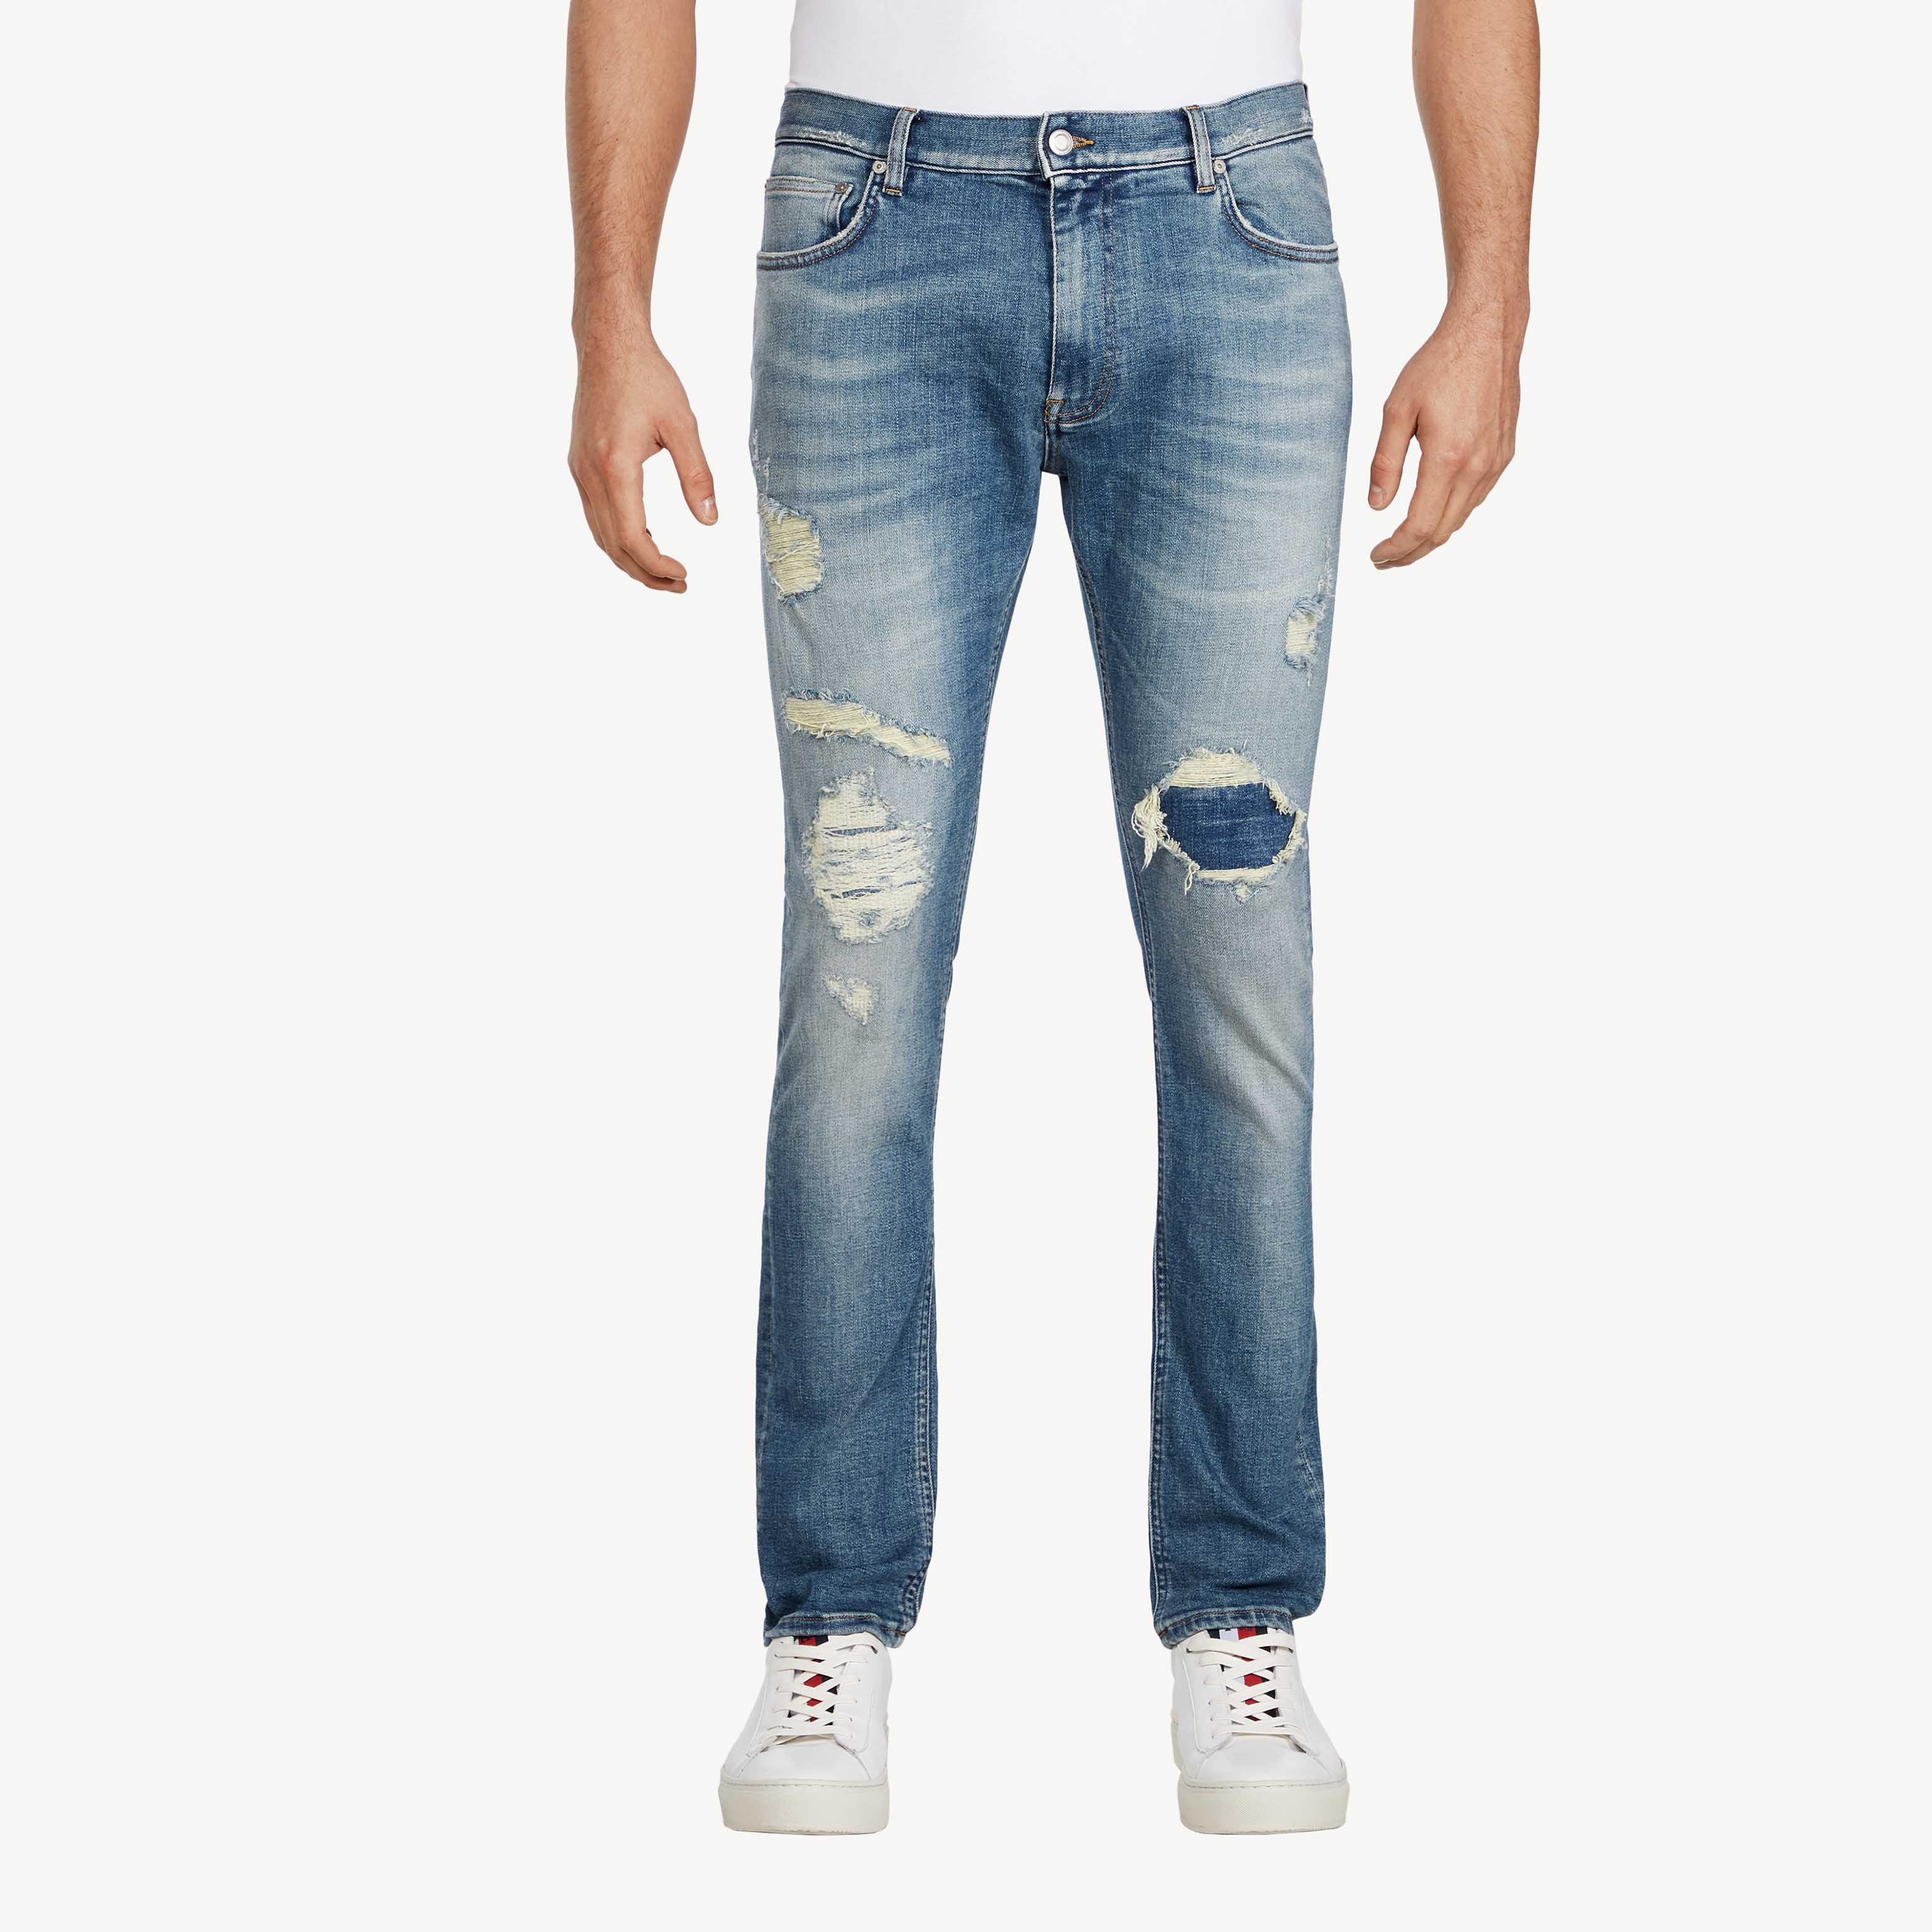 jeans with high back pockets